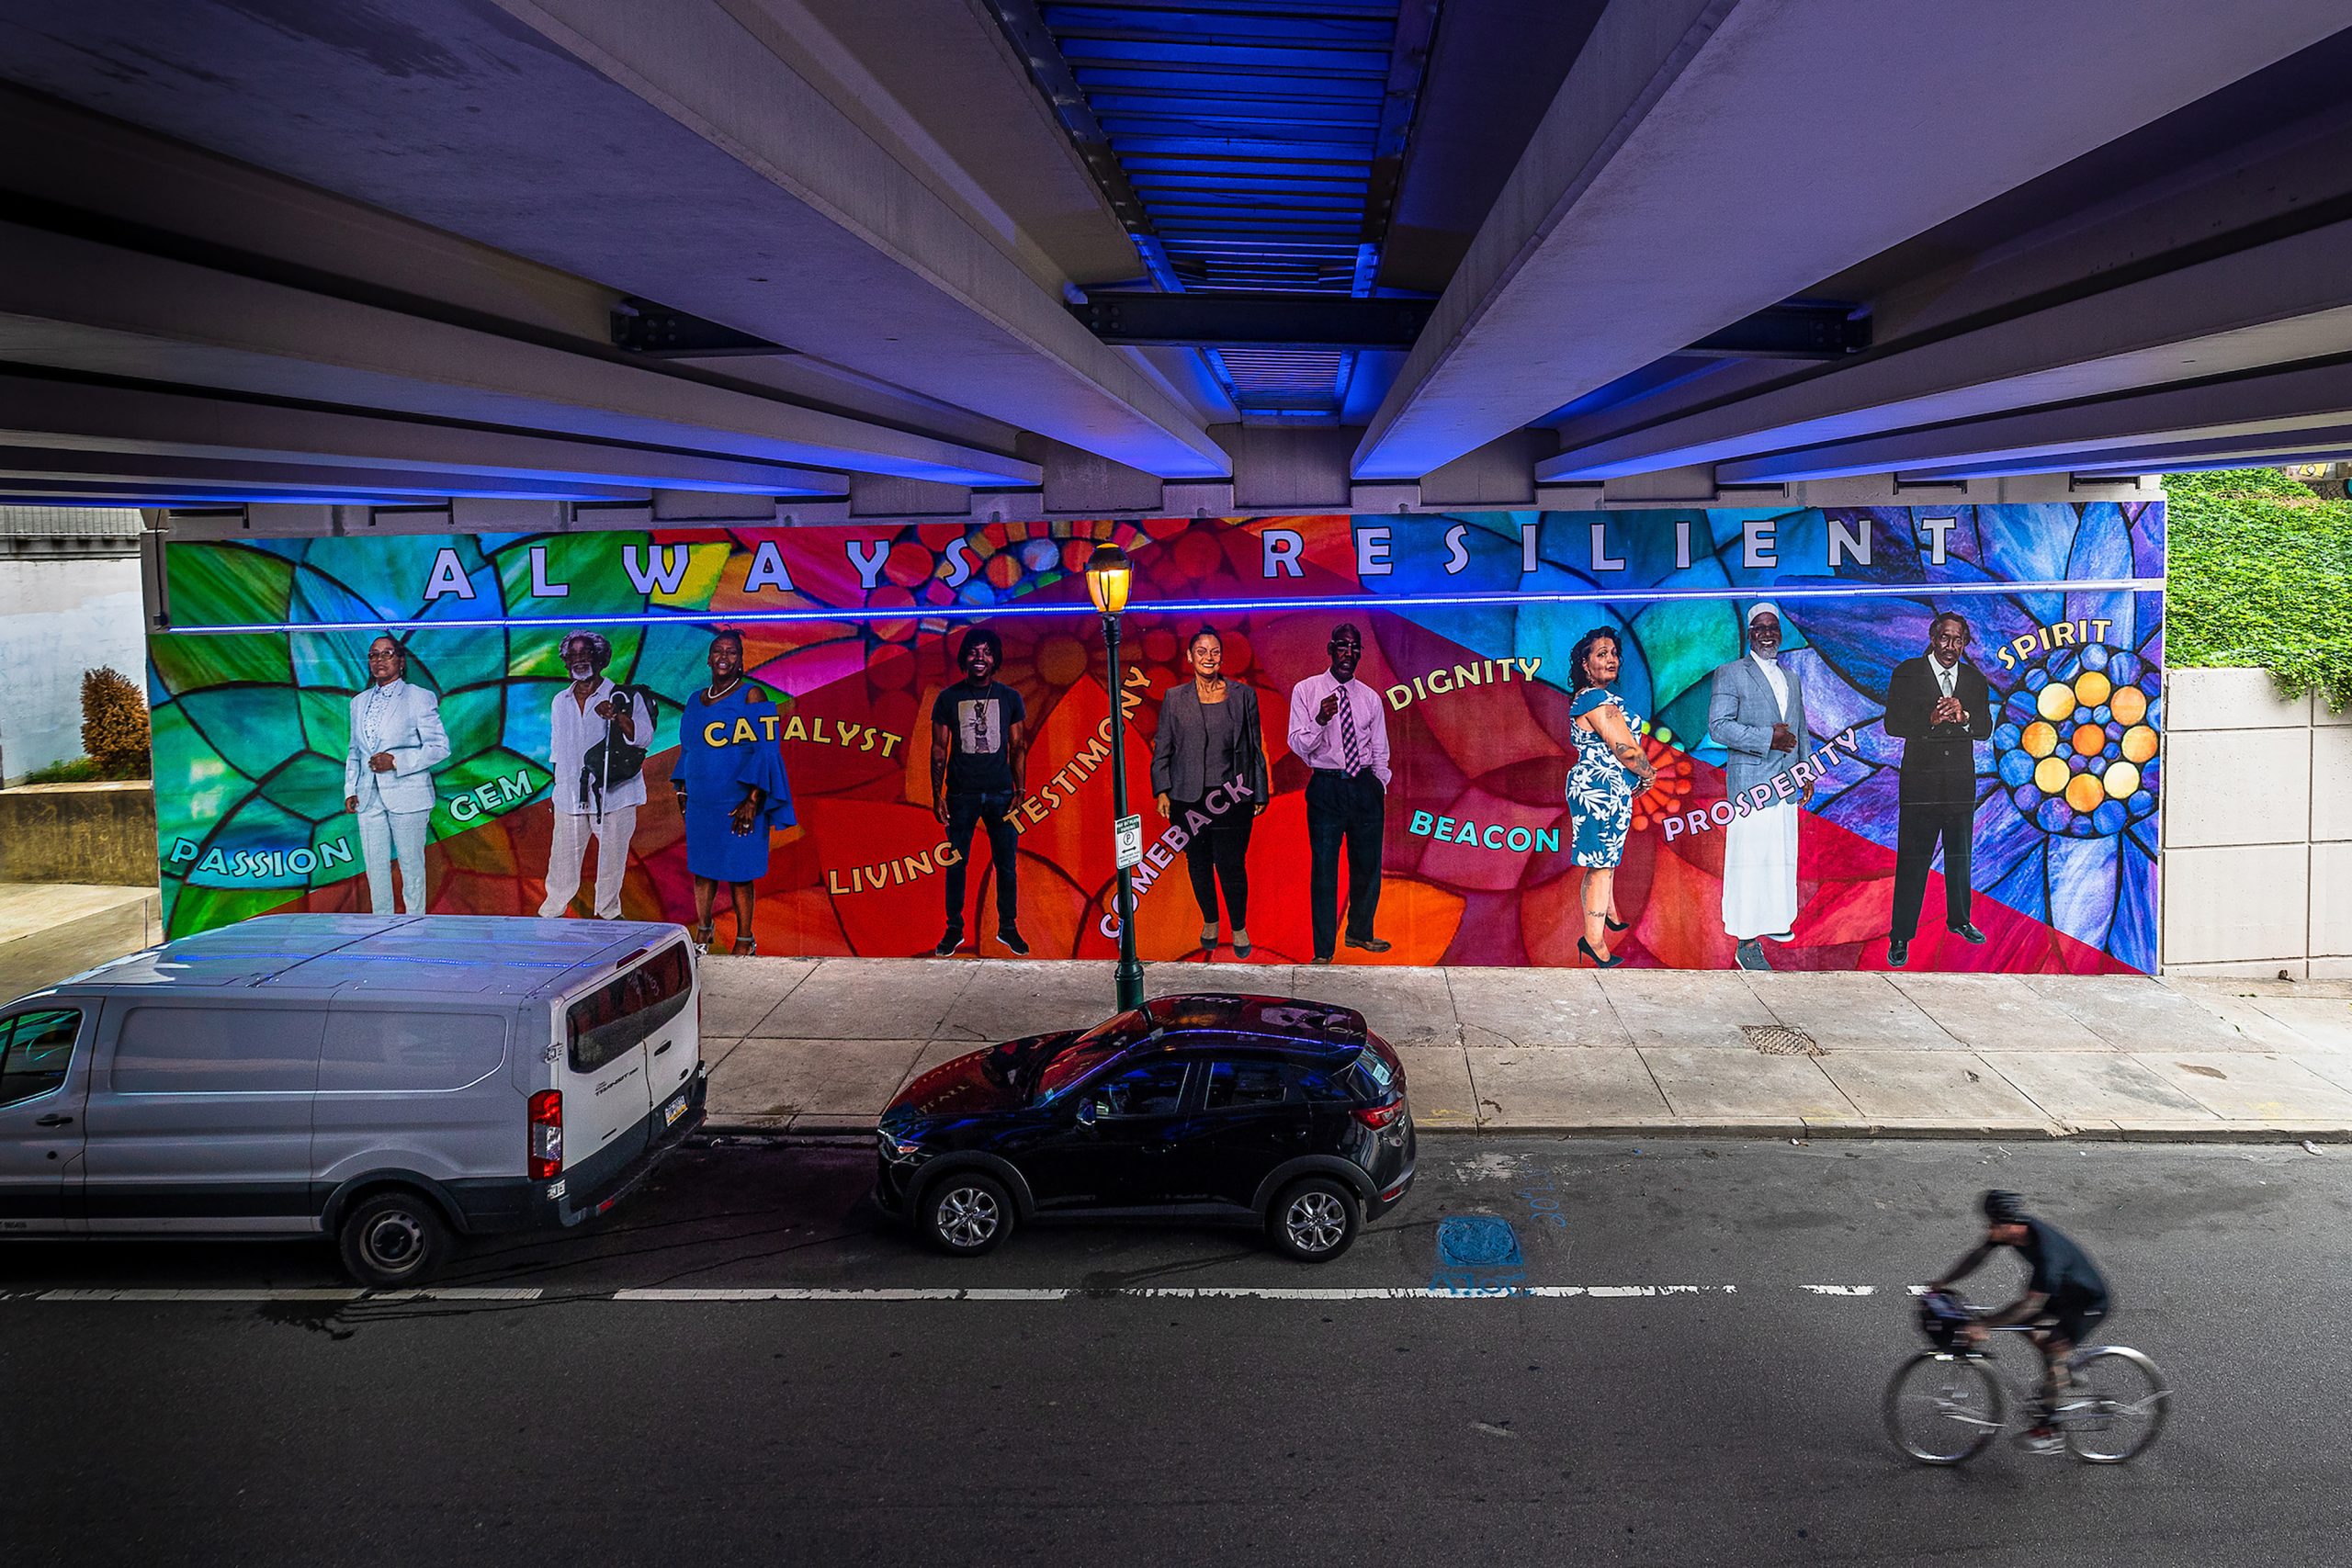 A public mural facing a street shows Black men and women standing in bright clothing against a background of a brightly colored floral pattern with words capturing resilience integrated into the pattern. Above them are the words 